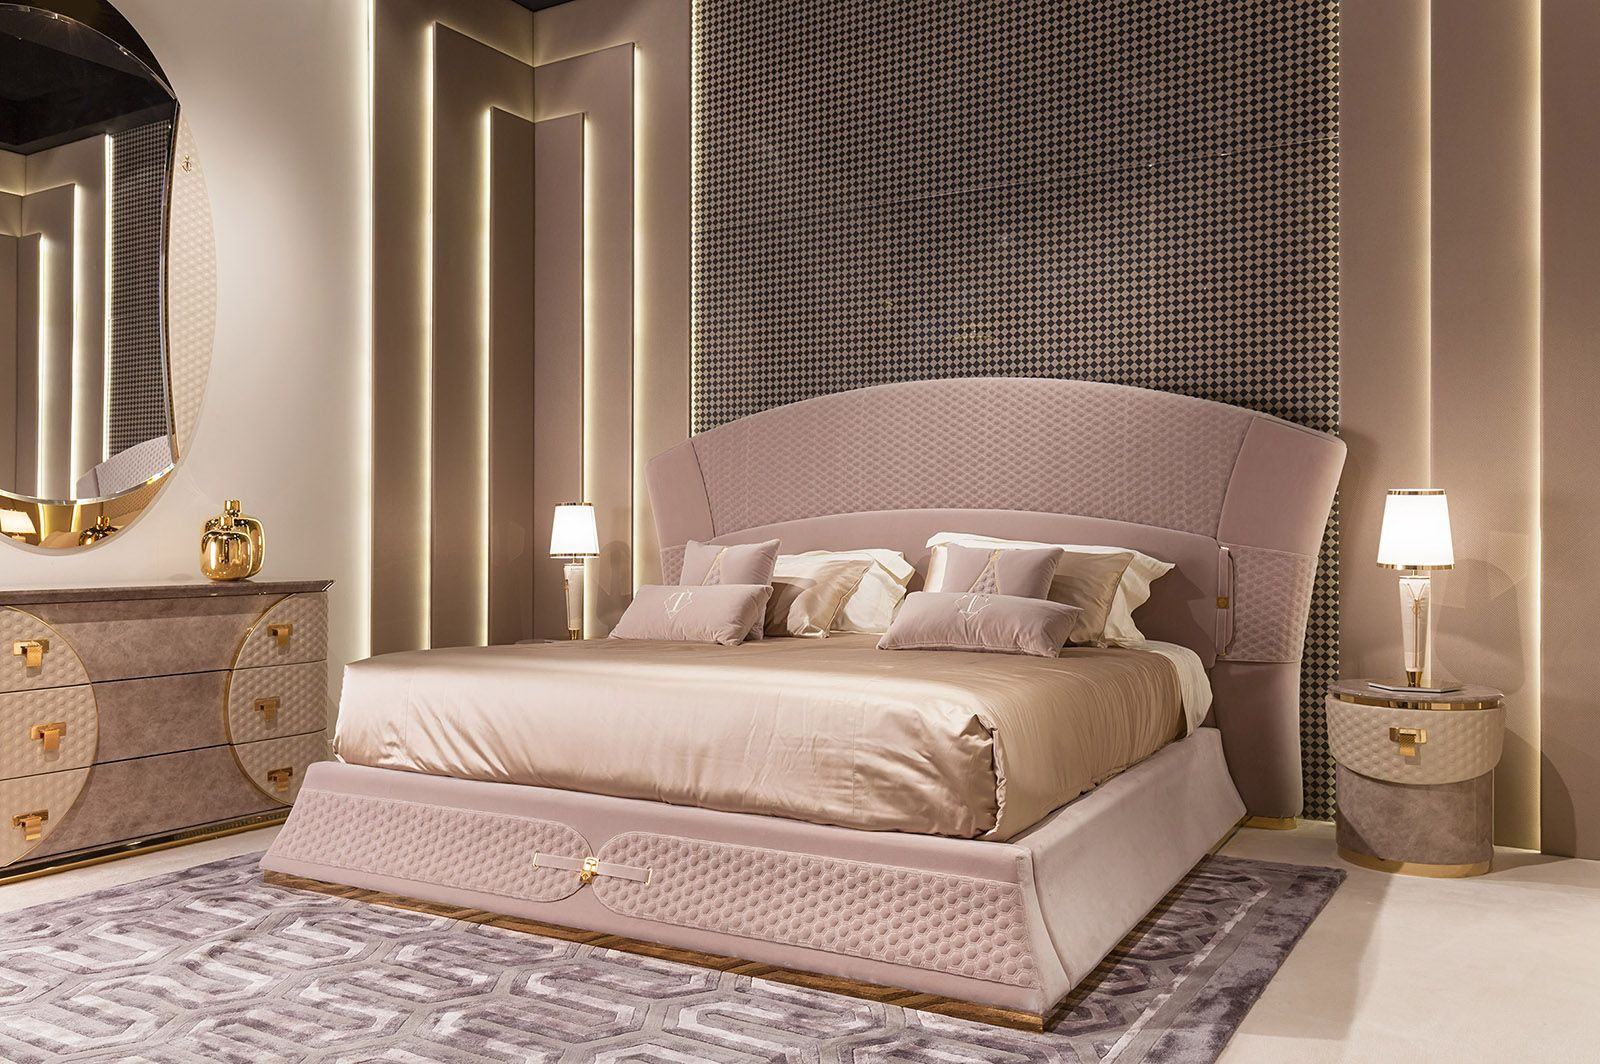 Modern Luxury Bedroom Furniture
 Italian Furniture for exclusive and modern design